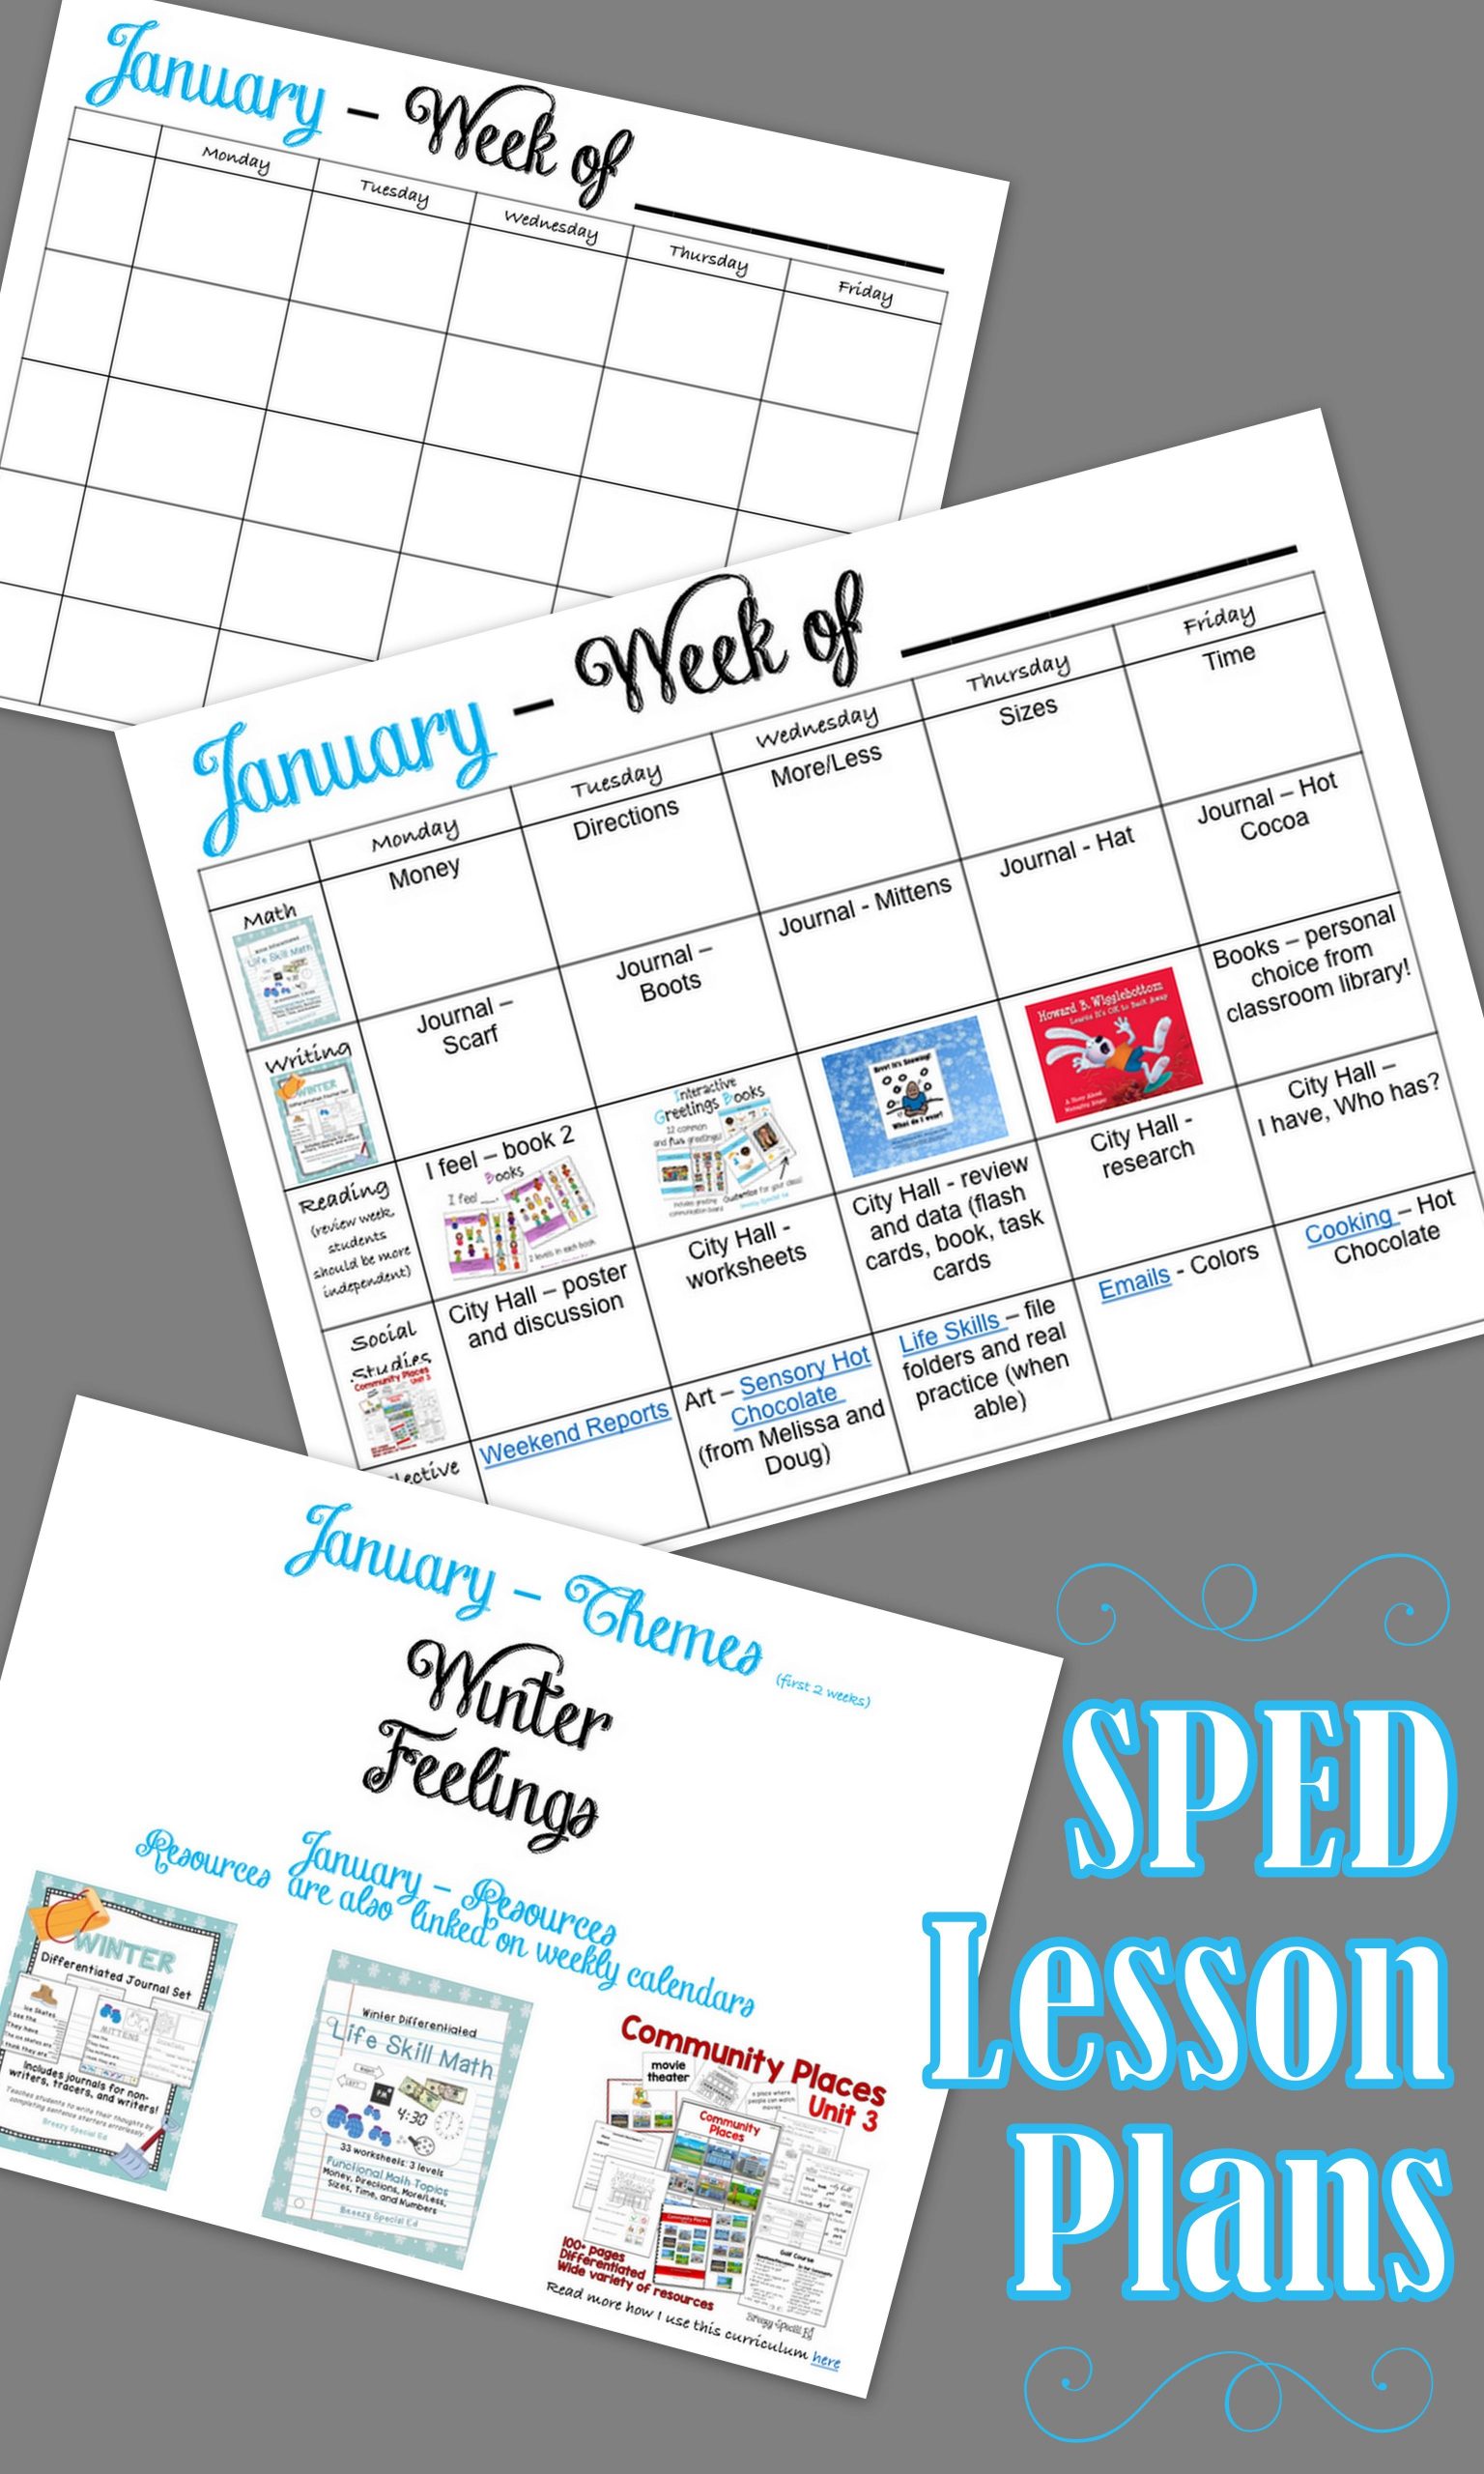 January Lesson Plans For Special Education | Special